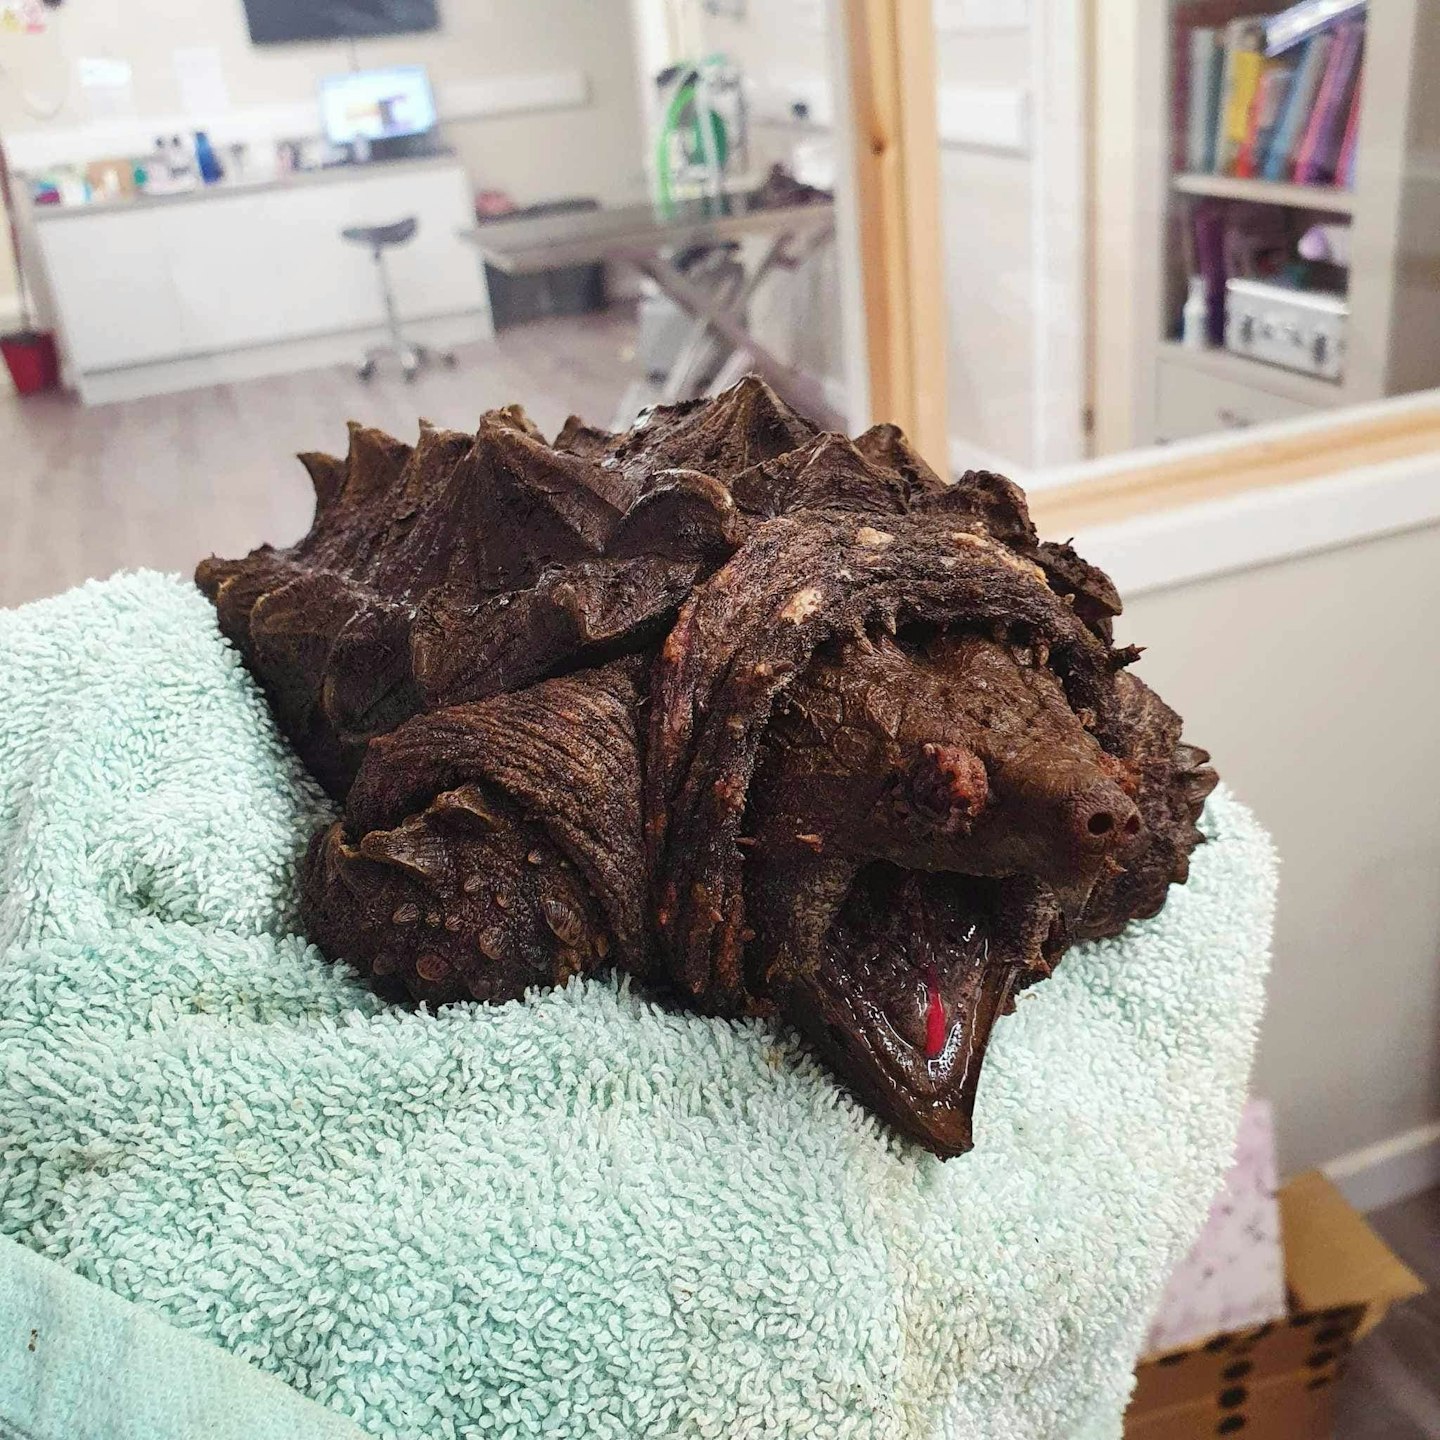 'Fluffy' the alligator snapping turtle (Image: Wild Side Vets)